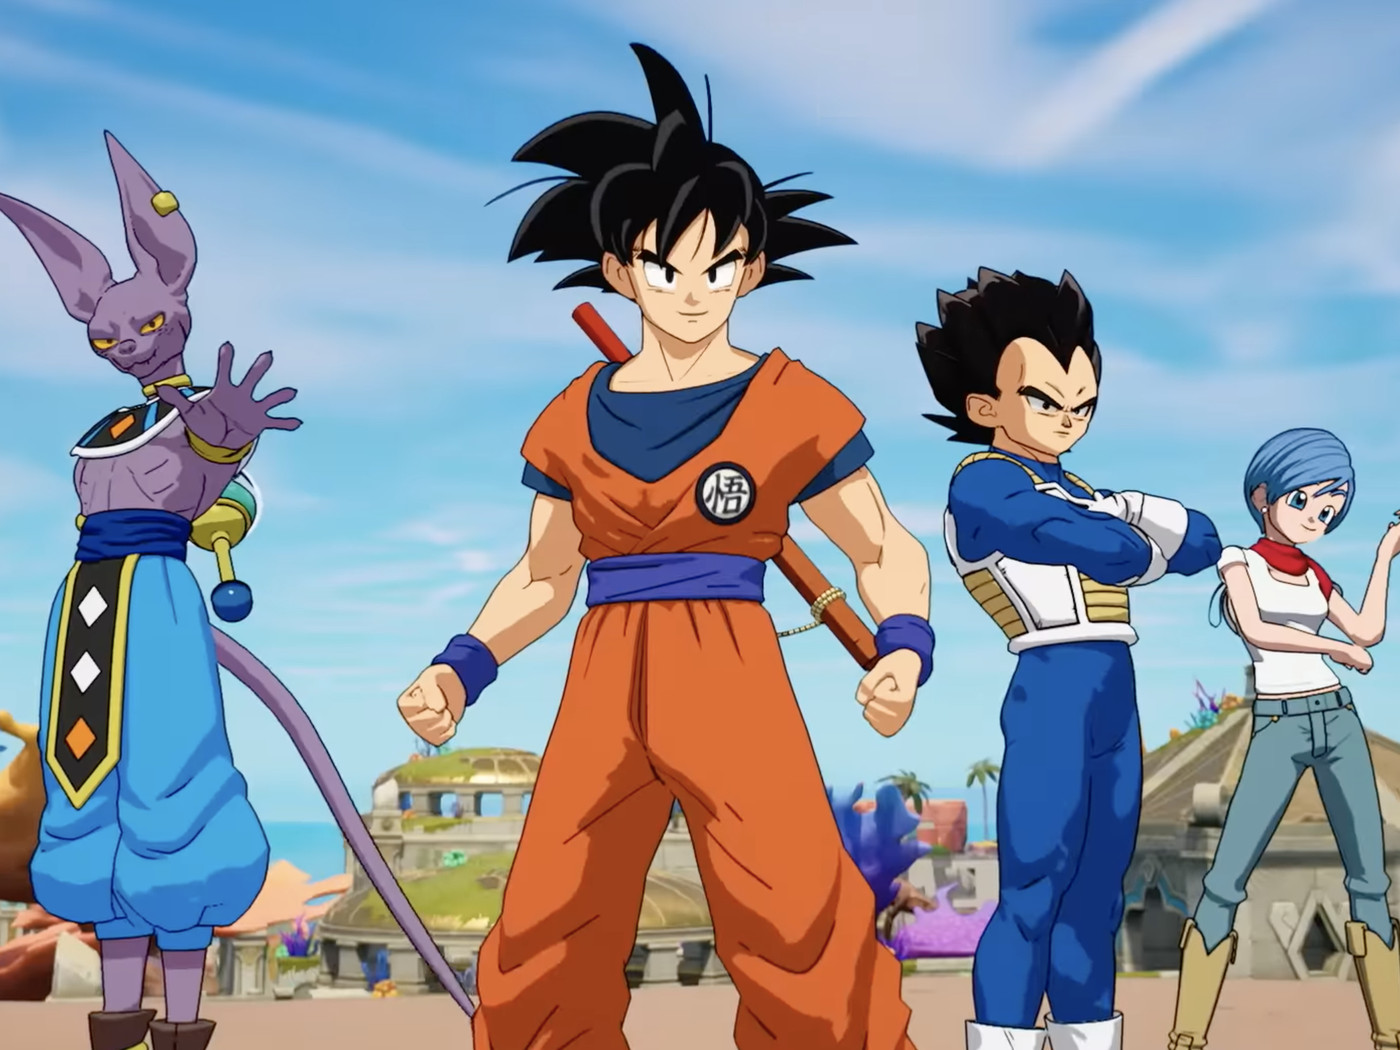 Fortnite's Dragon Ball event lets Goku hit dance moves like the Griddy